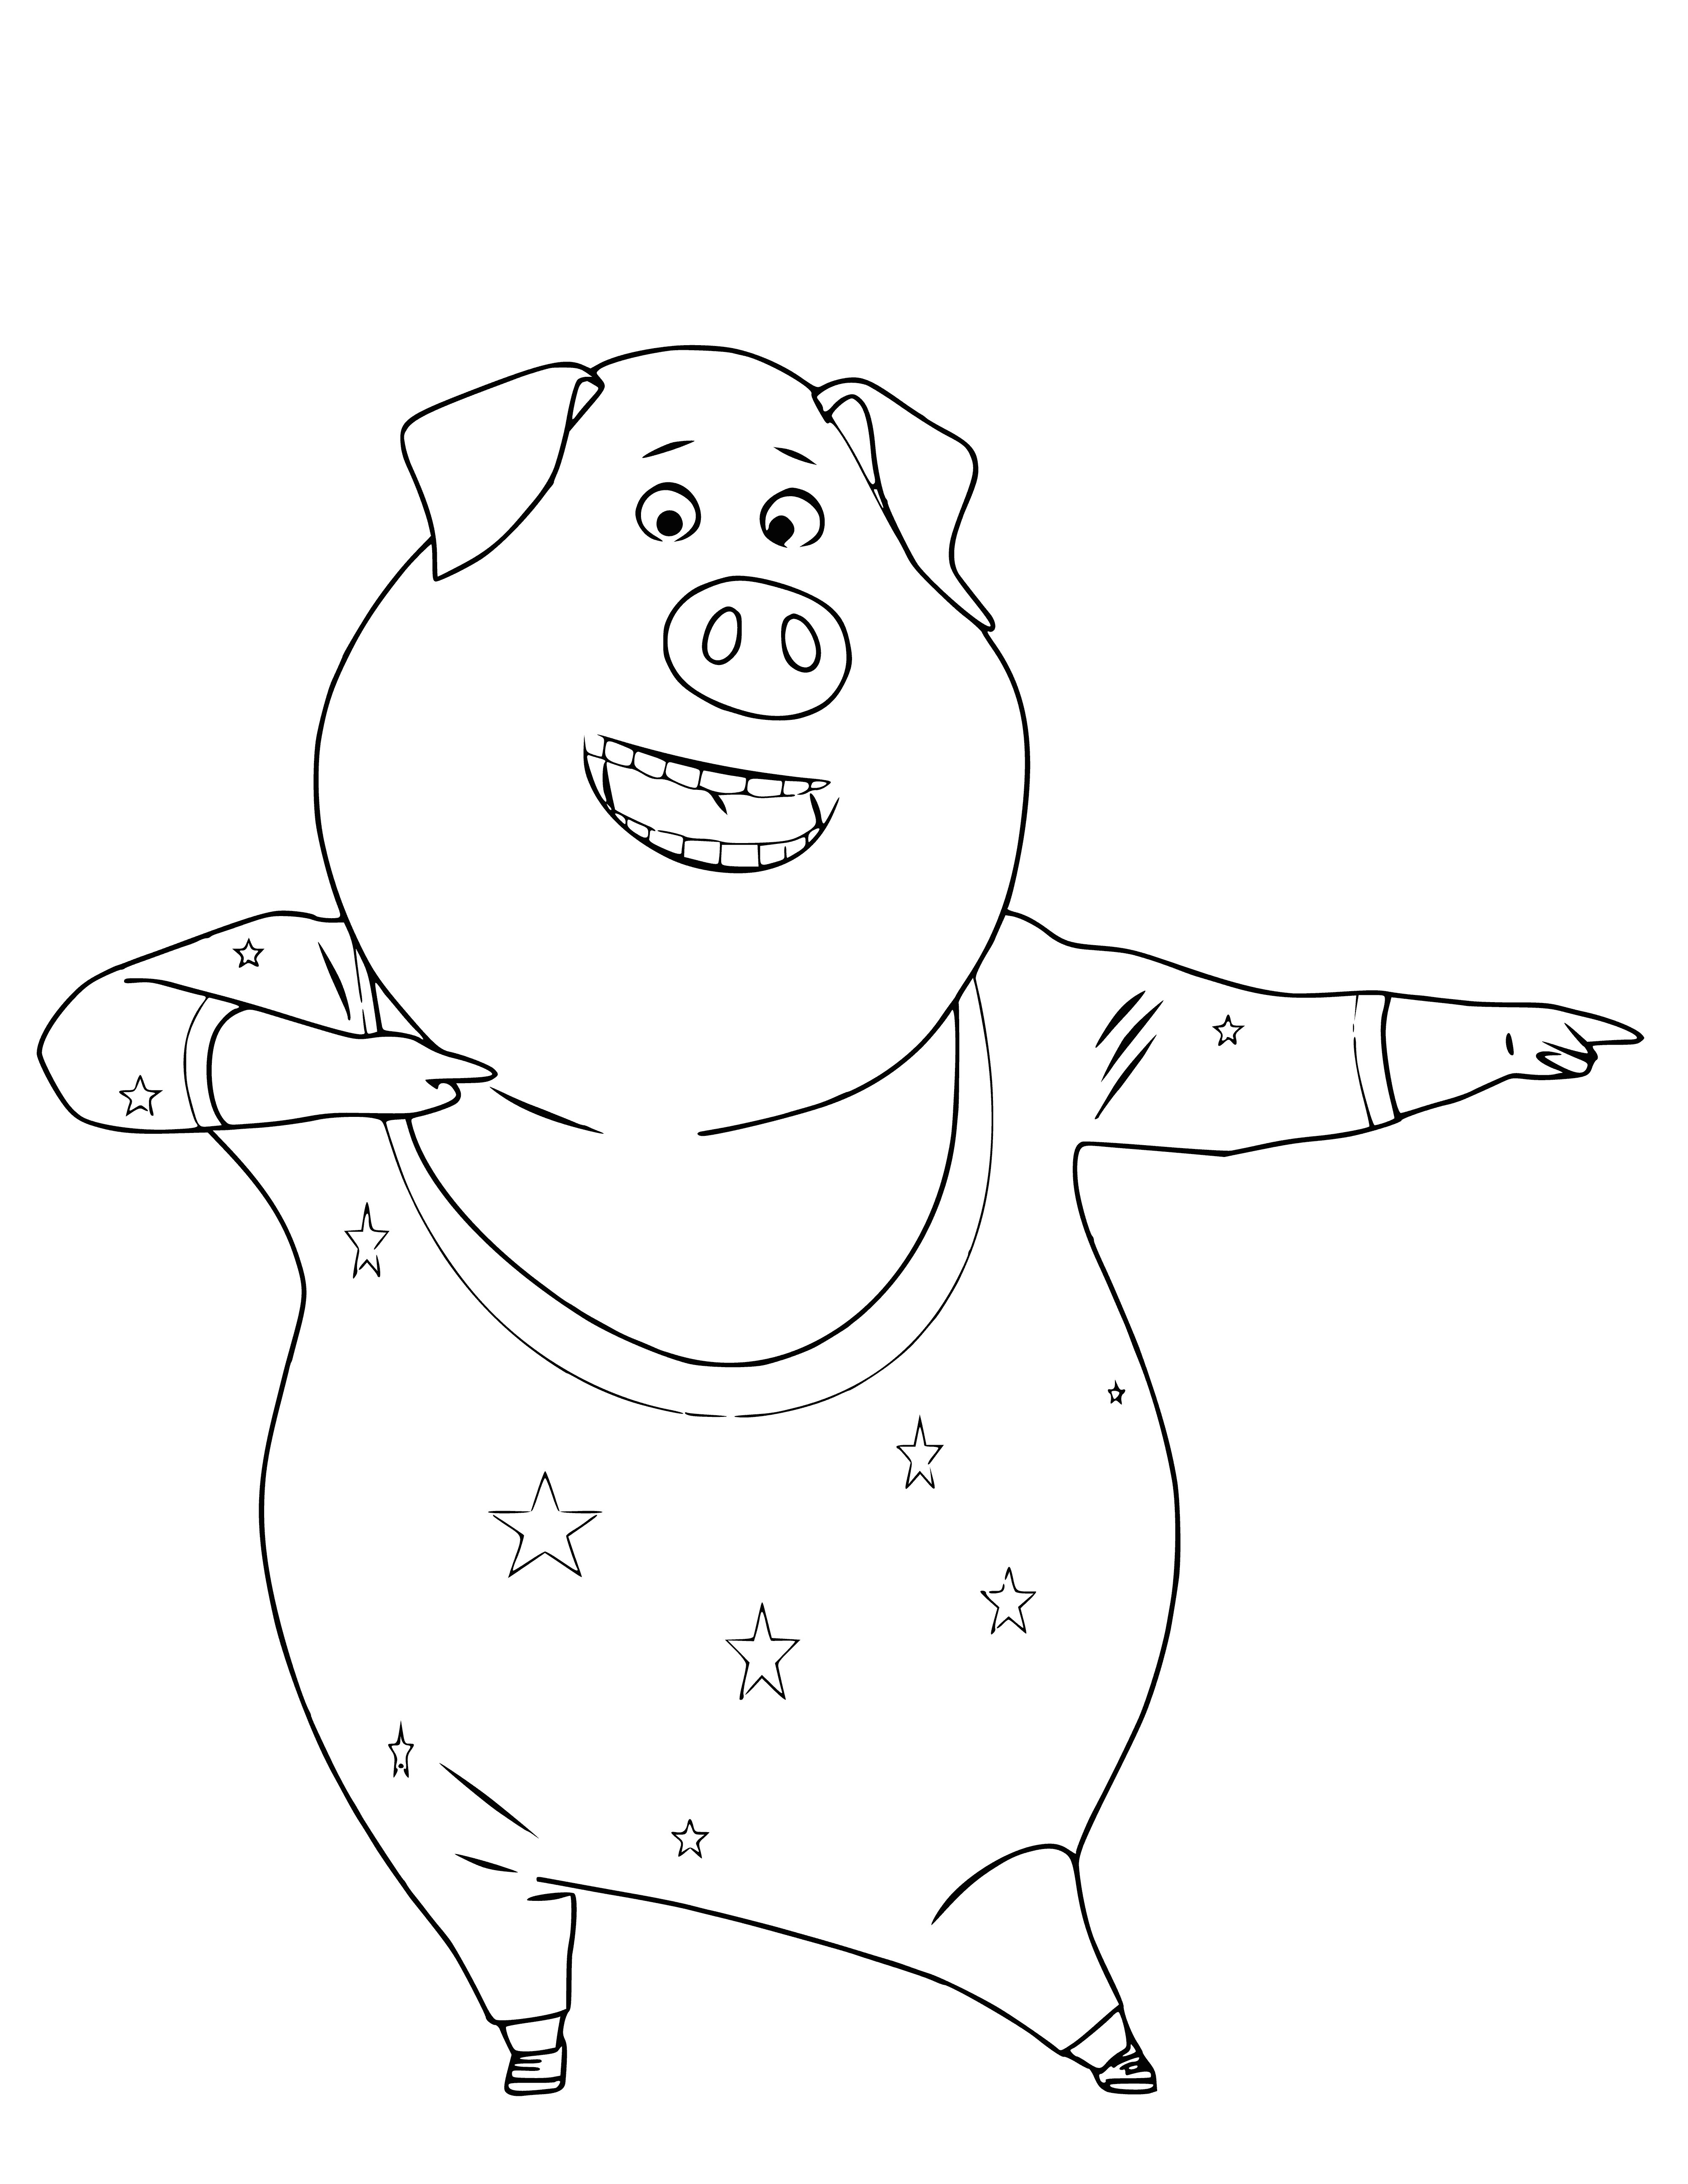 coloring page: Gunther is dancing in blue, black & brown wearing an orange-haired smile with a black & white scarf around his neck. #dancing #happy